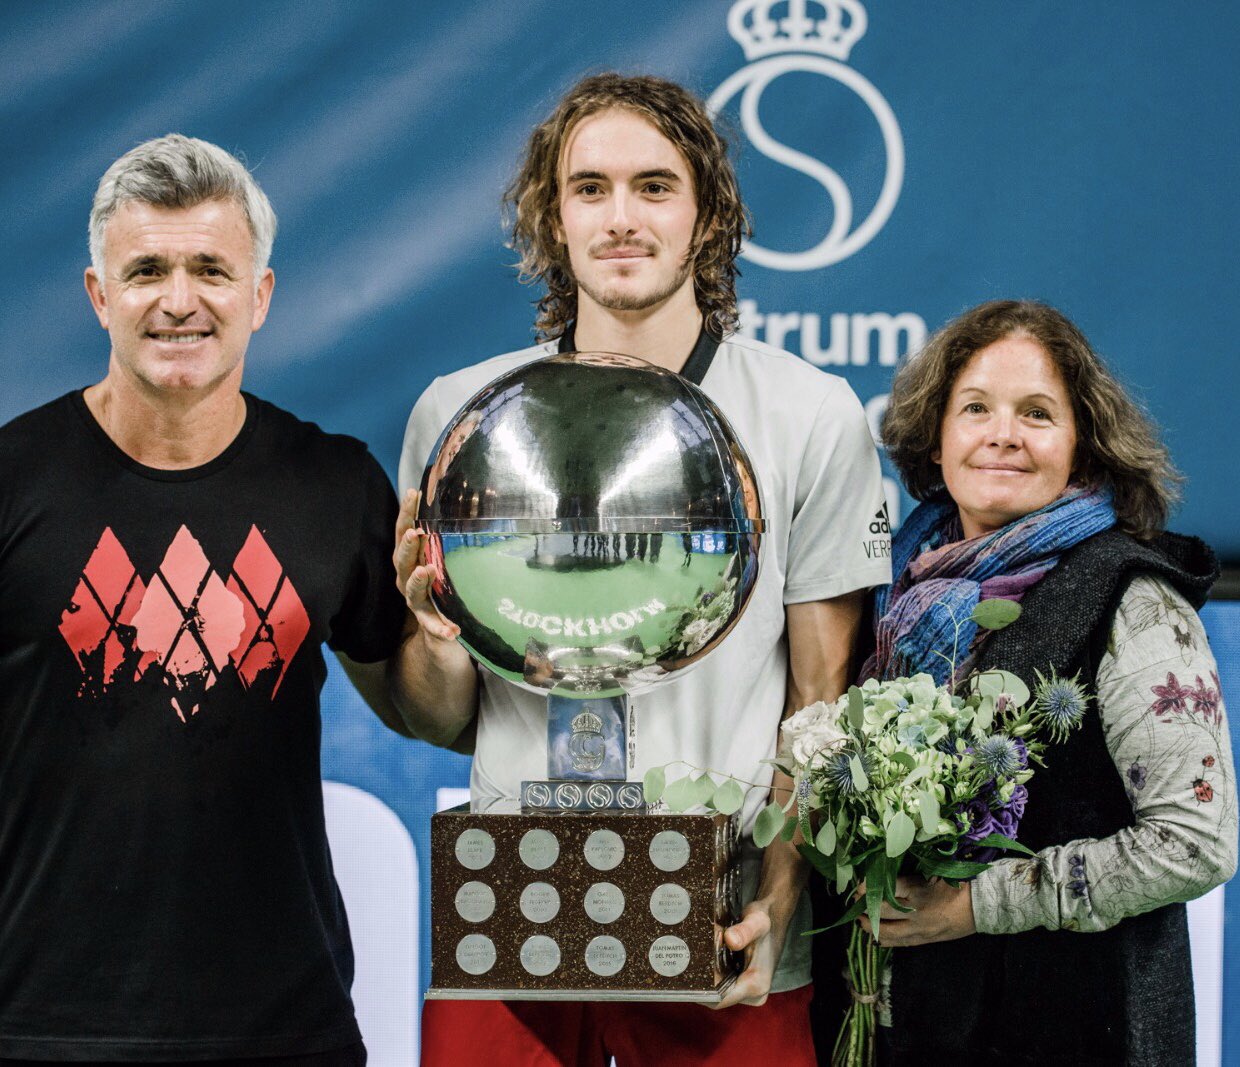 Stefanos Tsitsipas on Twitter: "You don't choose your